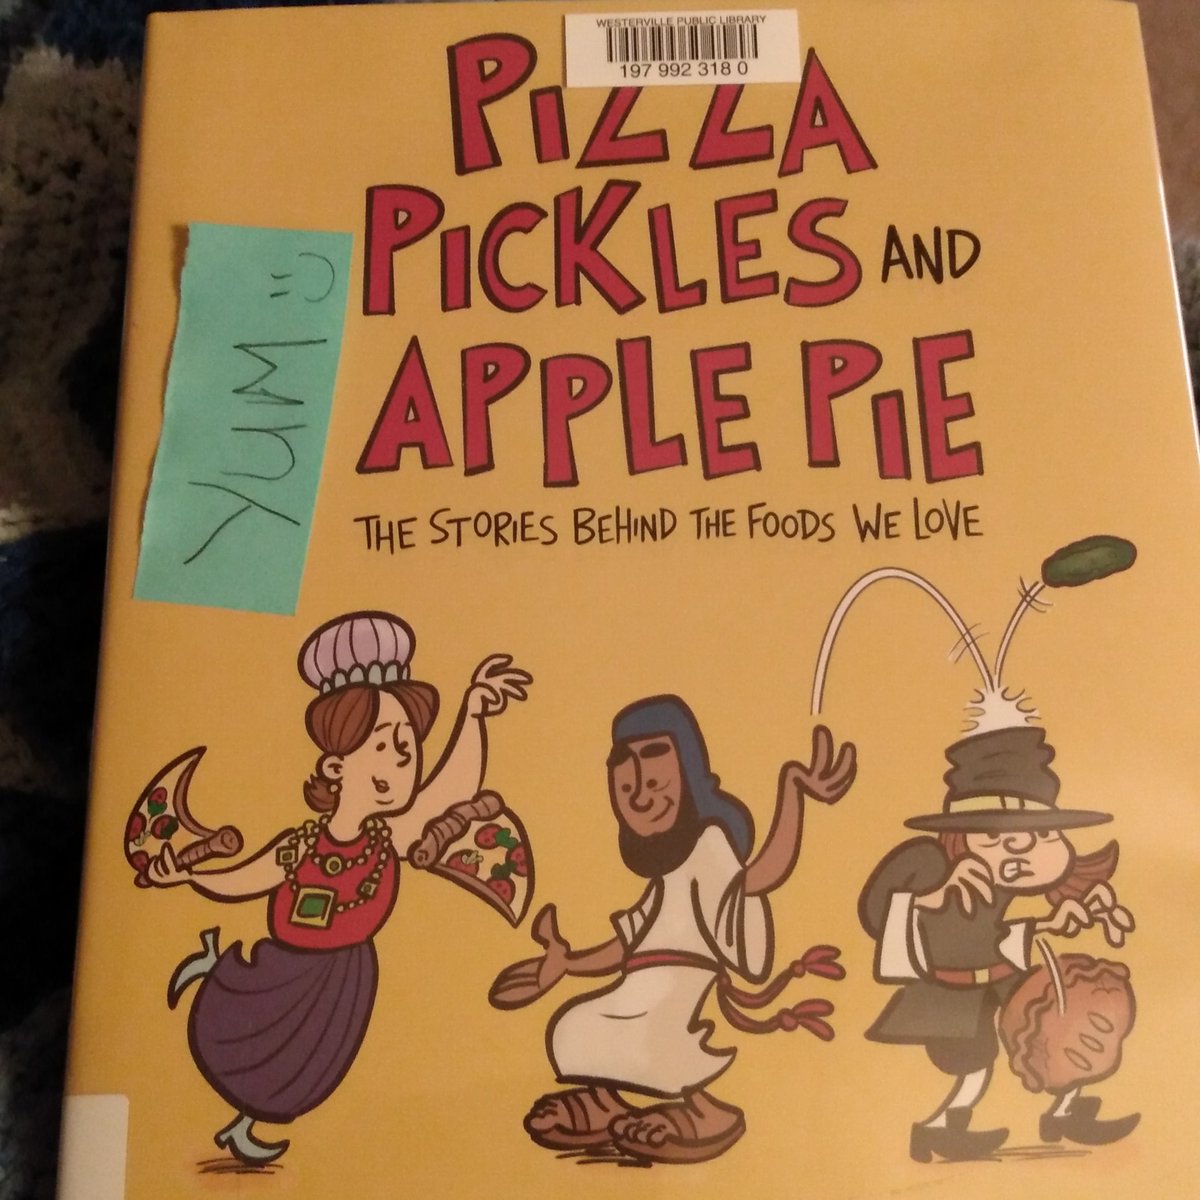 Not sure who added the note to my @westervlibrary delivery today, but @davidrickert7 @astrakidsbook Pizza, Pickles, and Apple Pie was definitely 'Yum'!